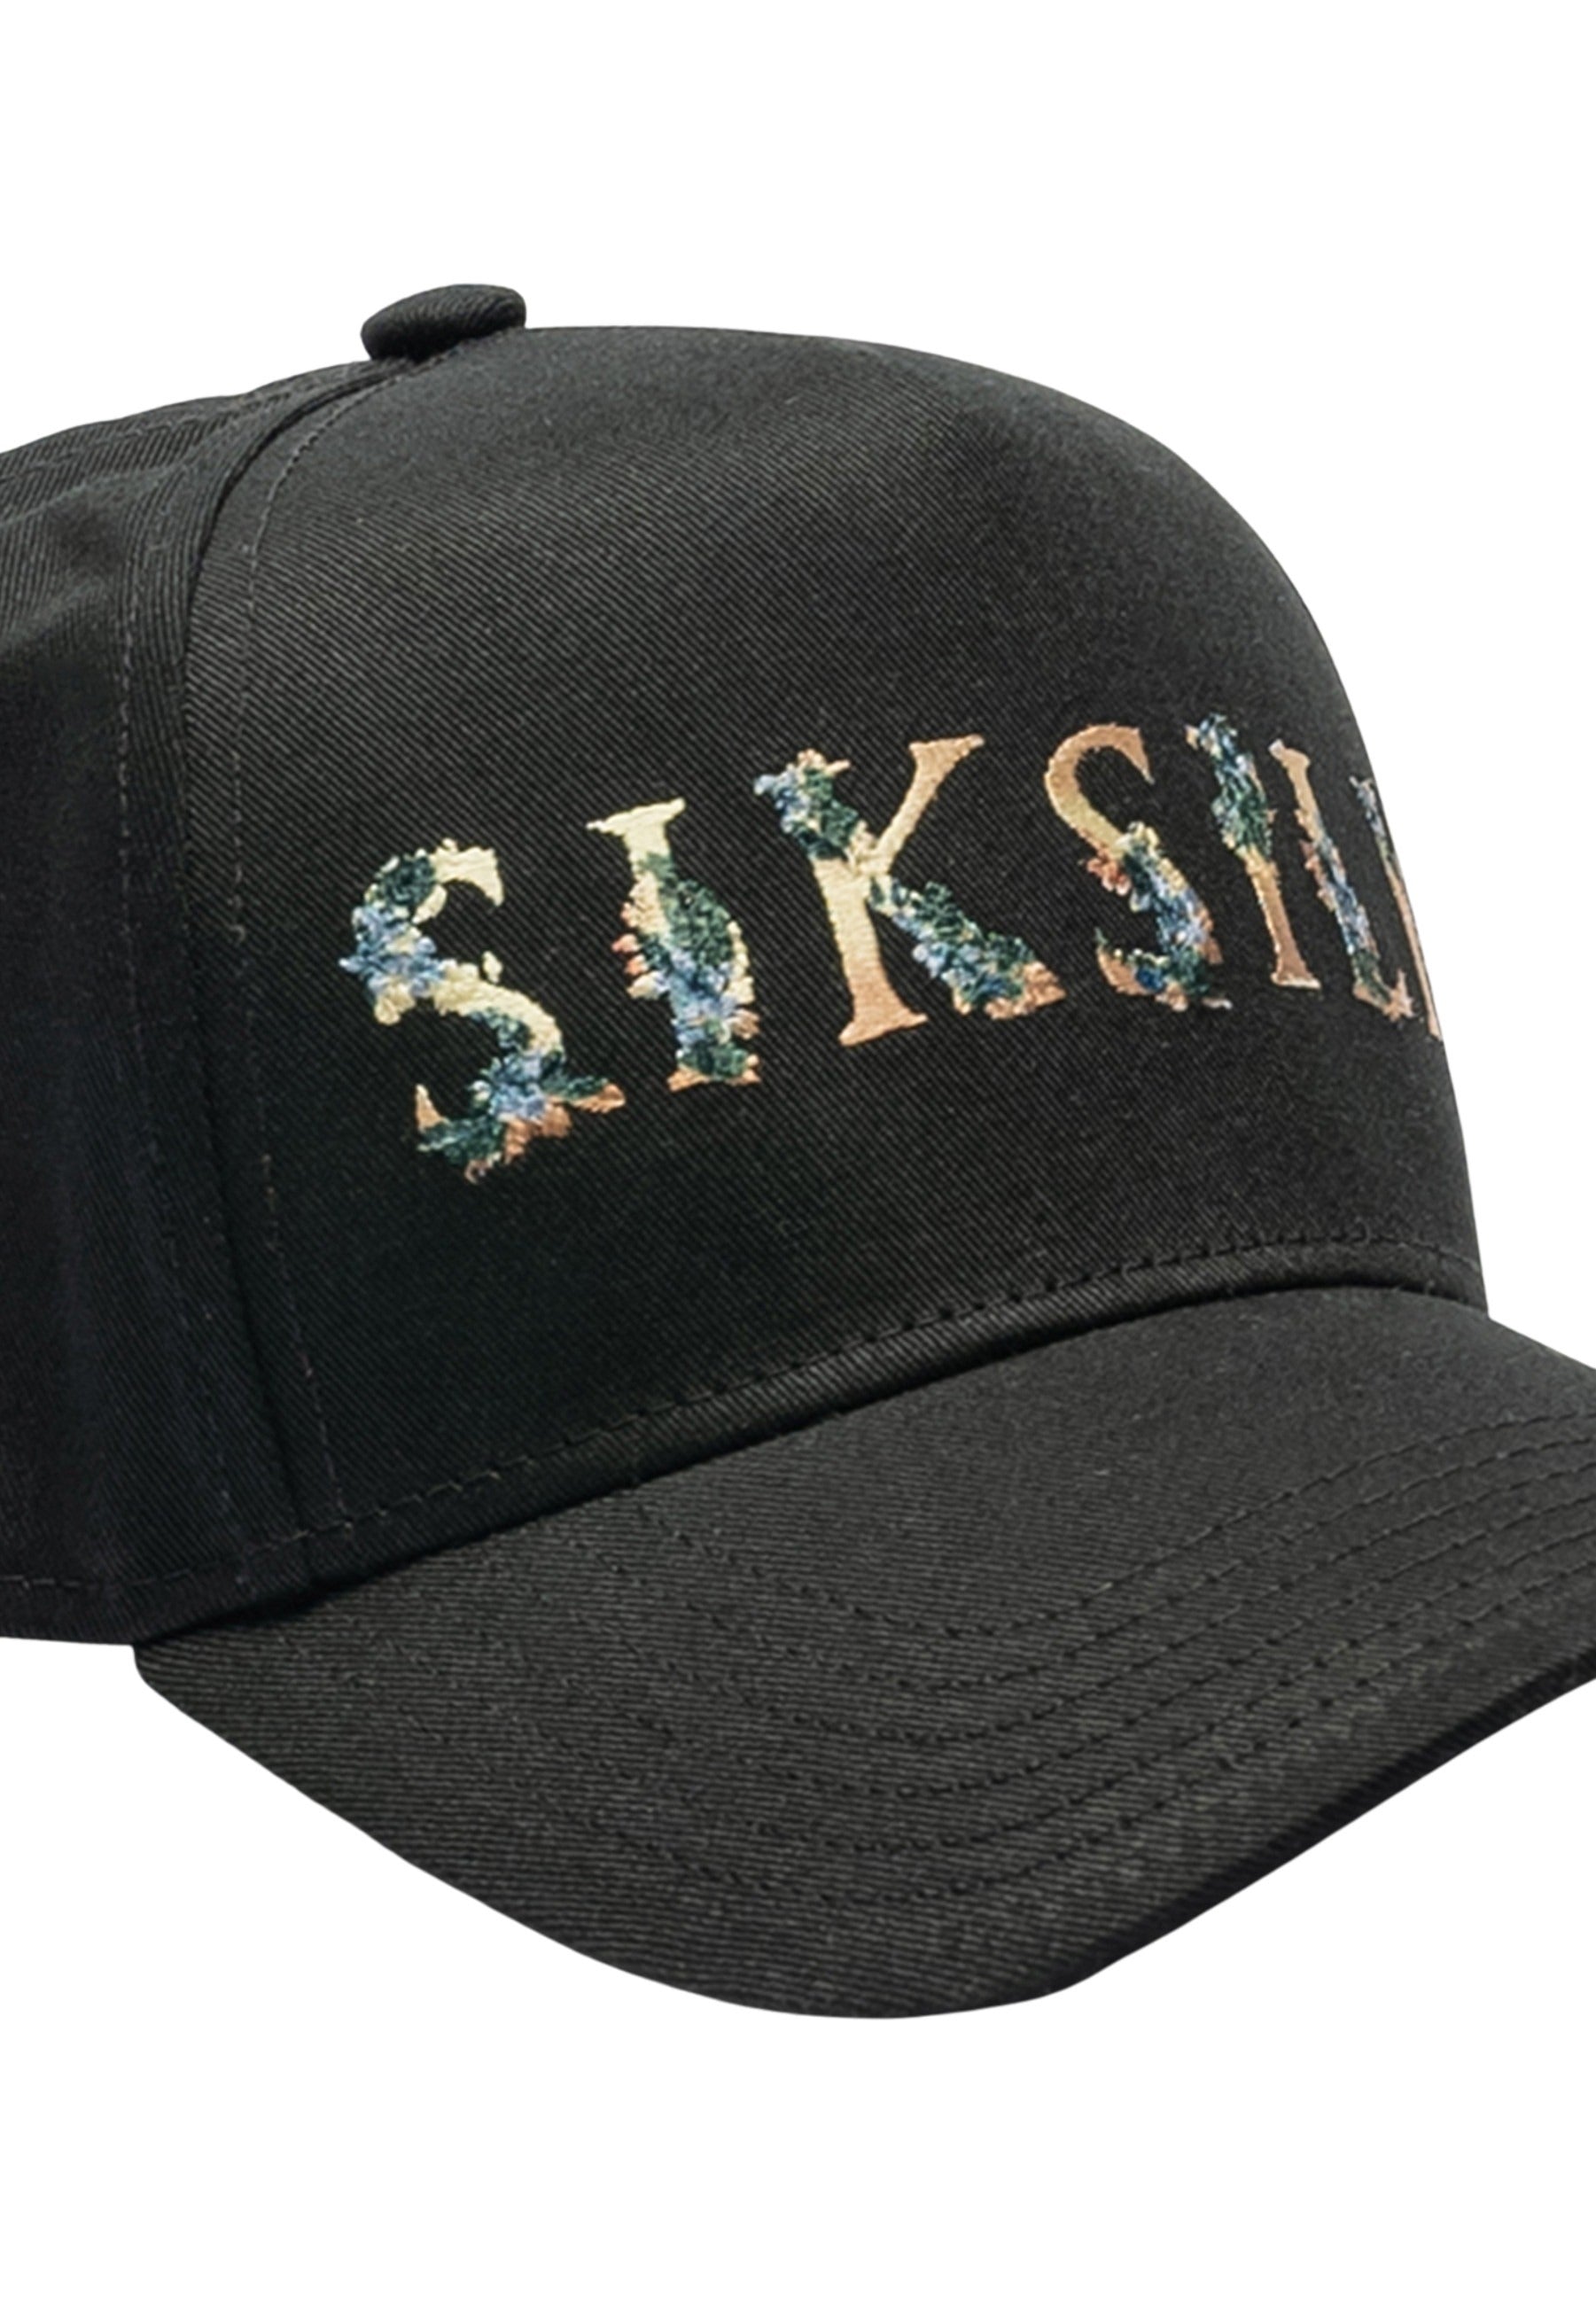 Floral Embroidery Trucker Cap in Black Caps SikSilk   